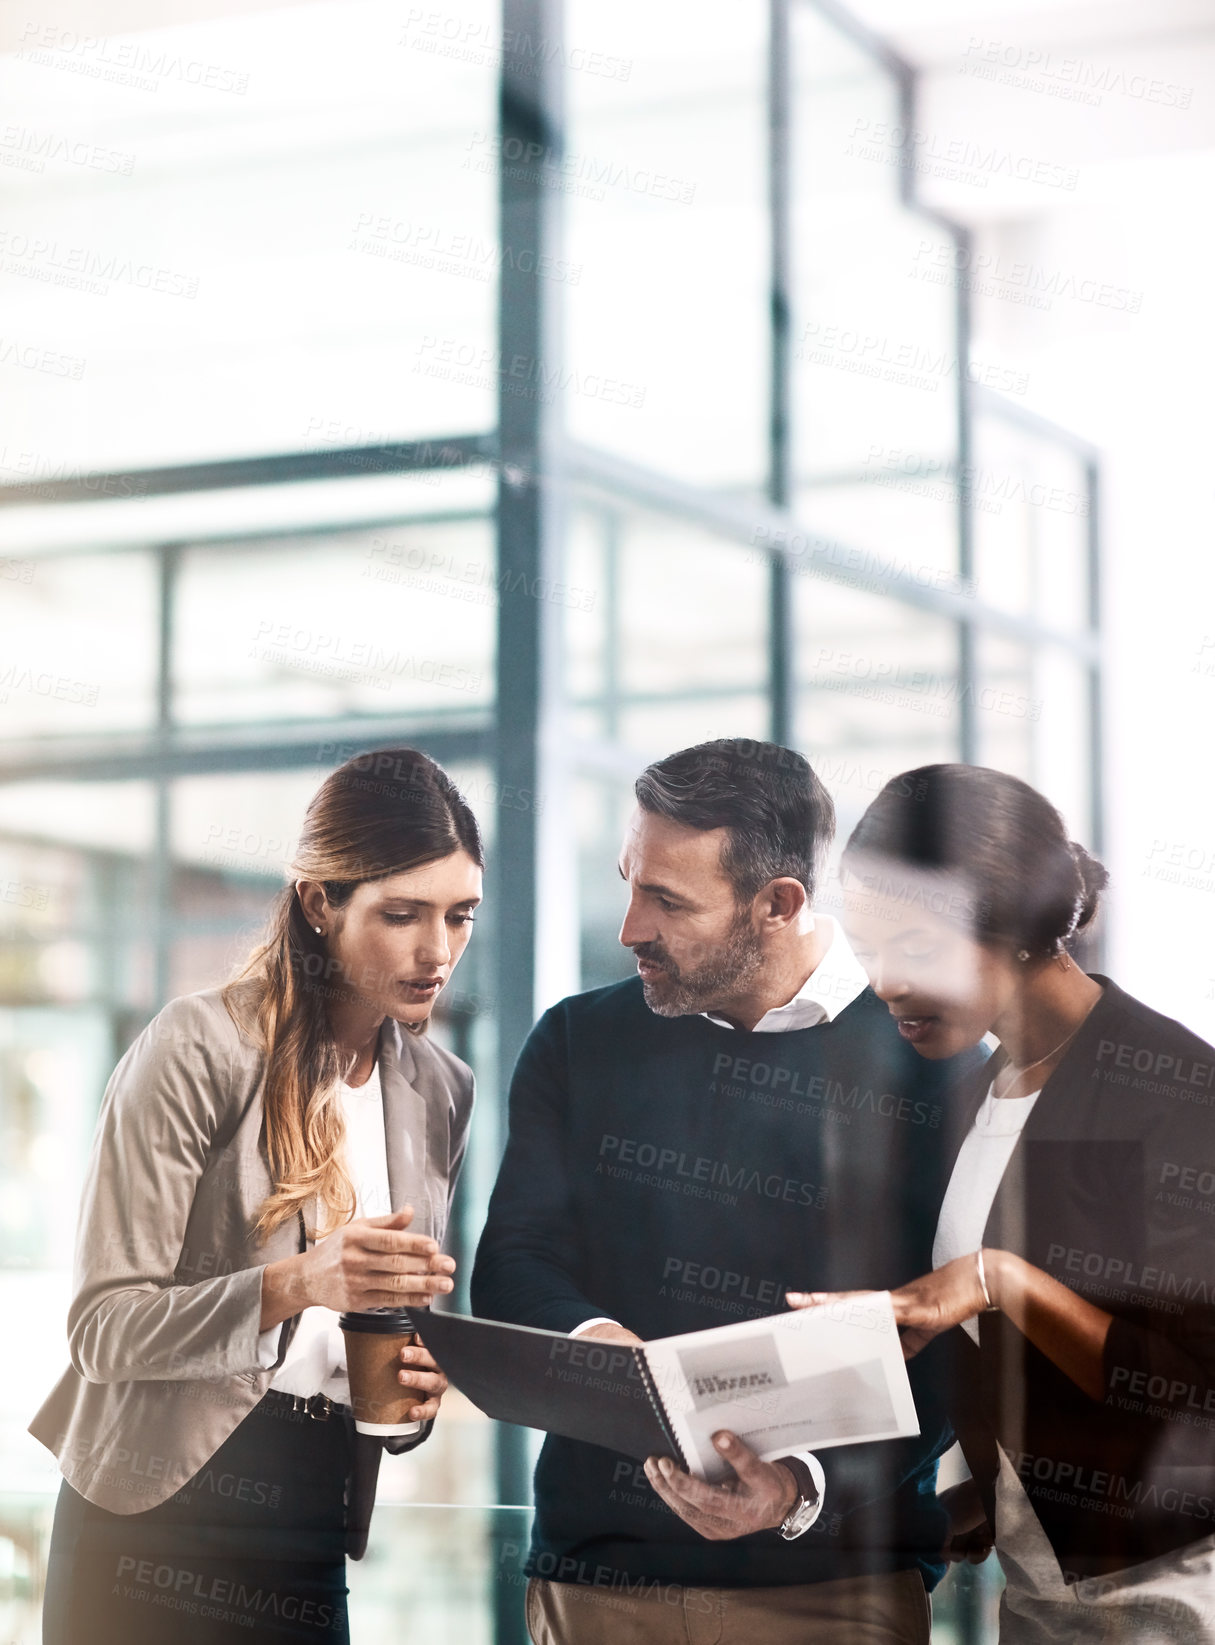 Buy stock photo Shot of a group of businesspeople discussing paperwork in a modern office